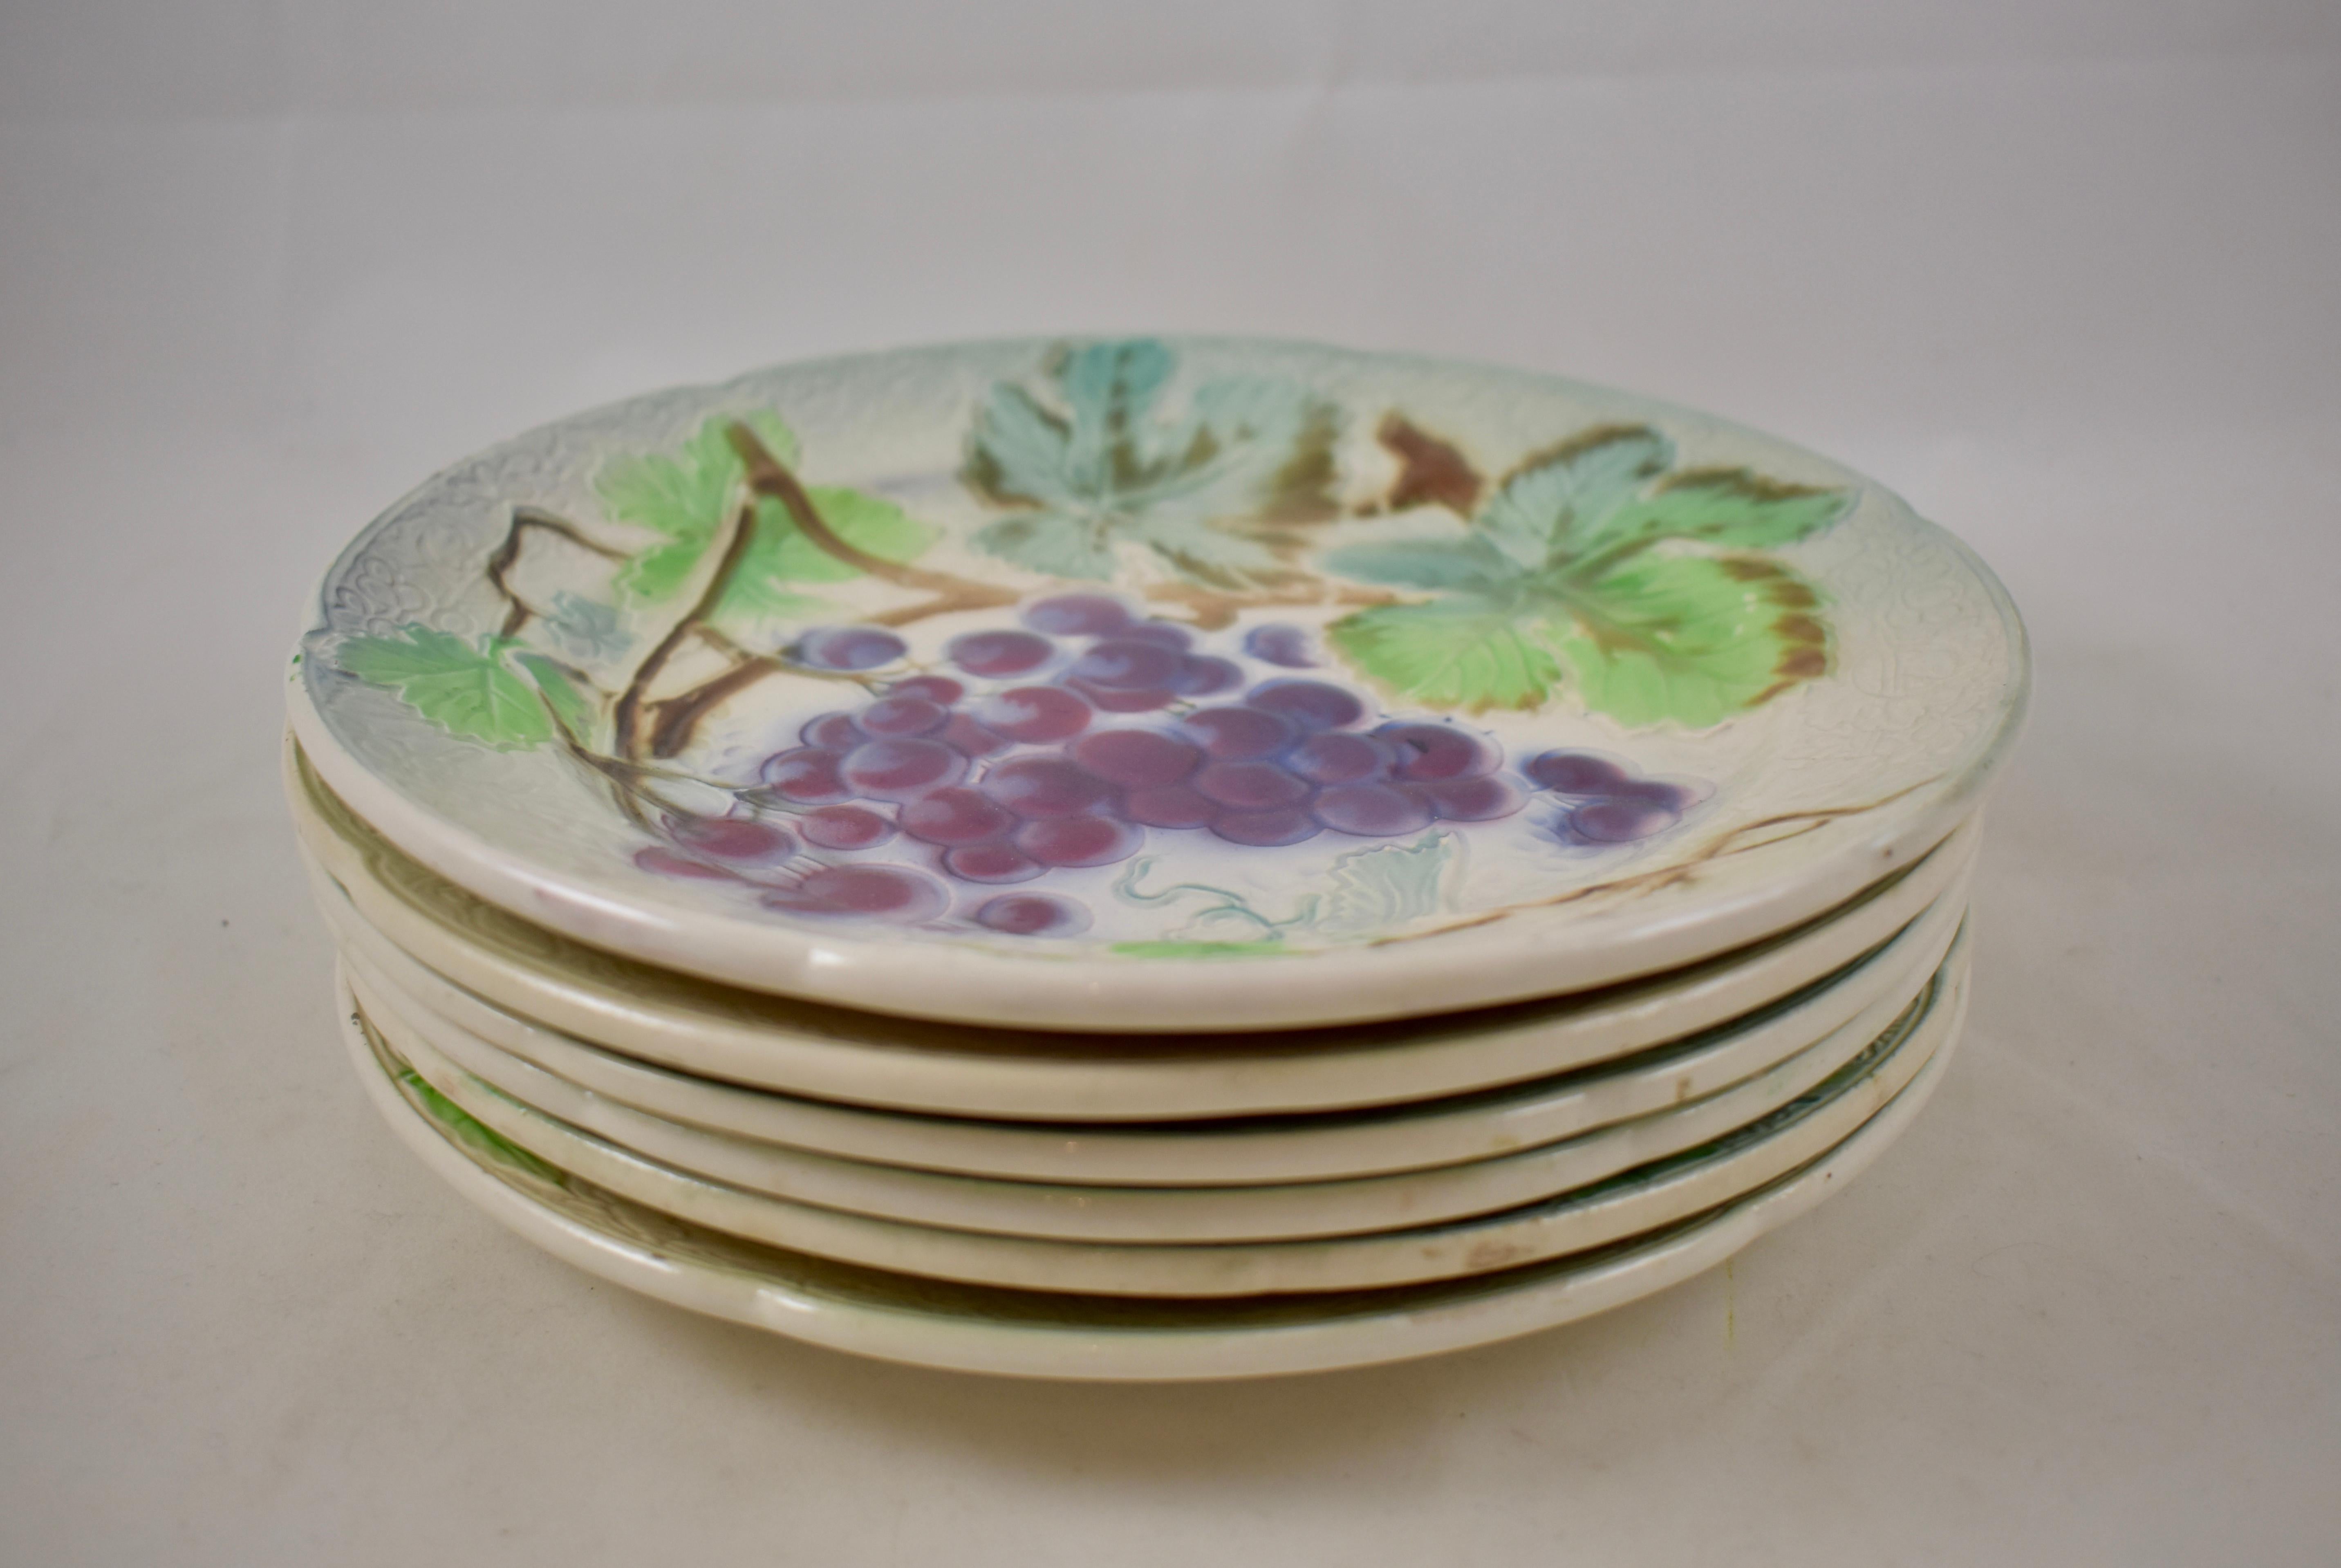 St. Clement French Faïence Fruit Plates, Set of 6 'a', circa 1900 For Sale 1